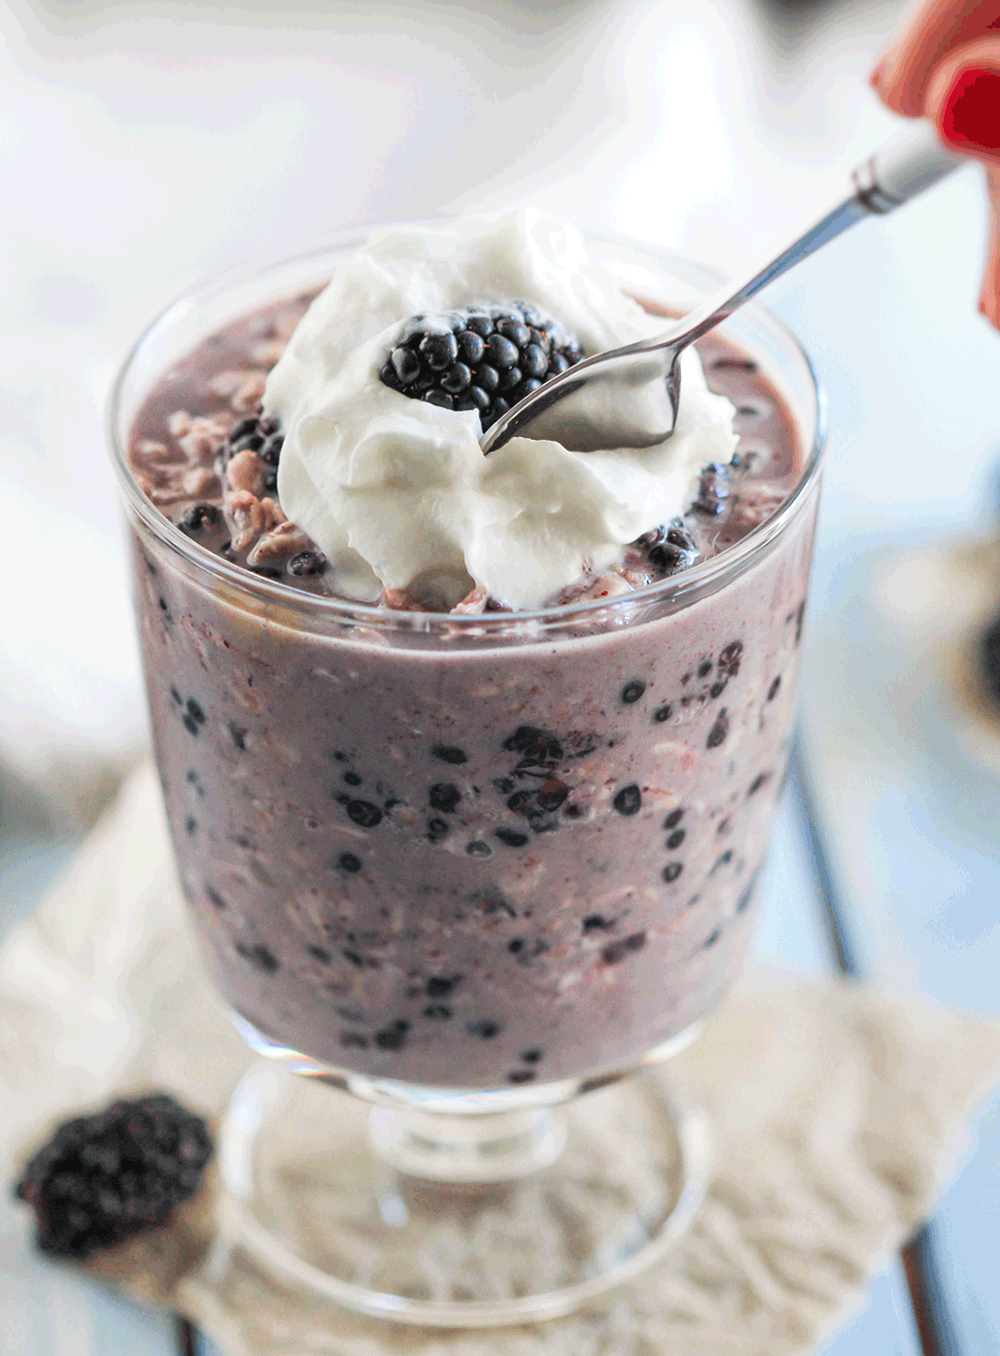 Make a batch of Healthy Blackberry Pie Overnight Dessert Oats! All the flavor of blackberry pie, all the sweetness of a dessert, with all the healthfulness and nutrition of oatmeal. Win-win-win. Oh, and it’s refined sugar free, gluten free, and vegan too! Healthy Dessert Recipes at the Desserts With Benefits Blog